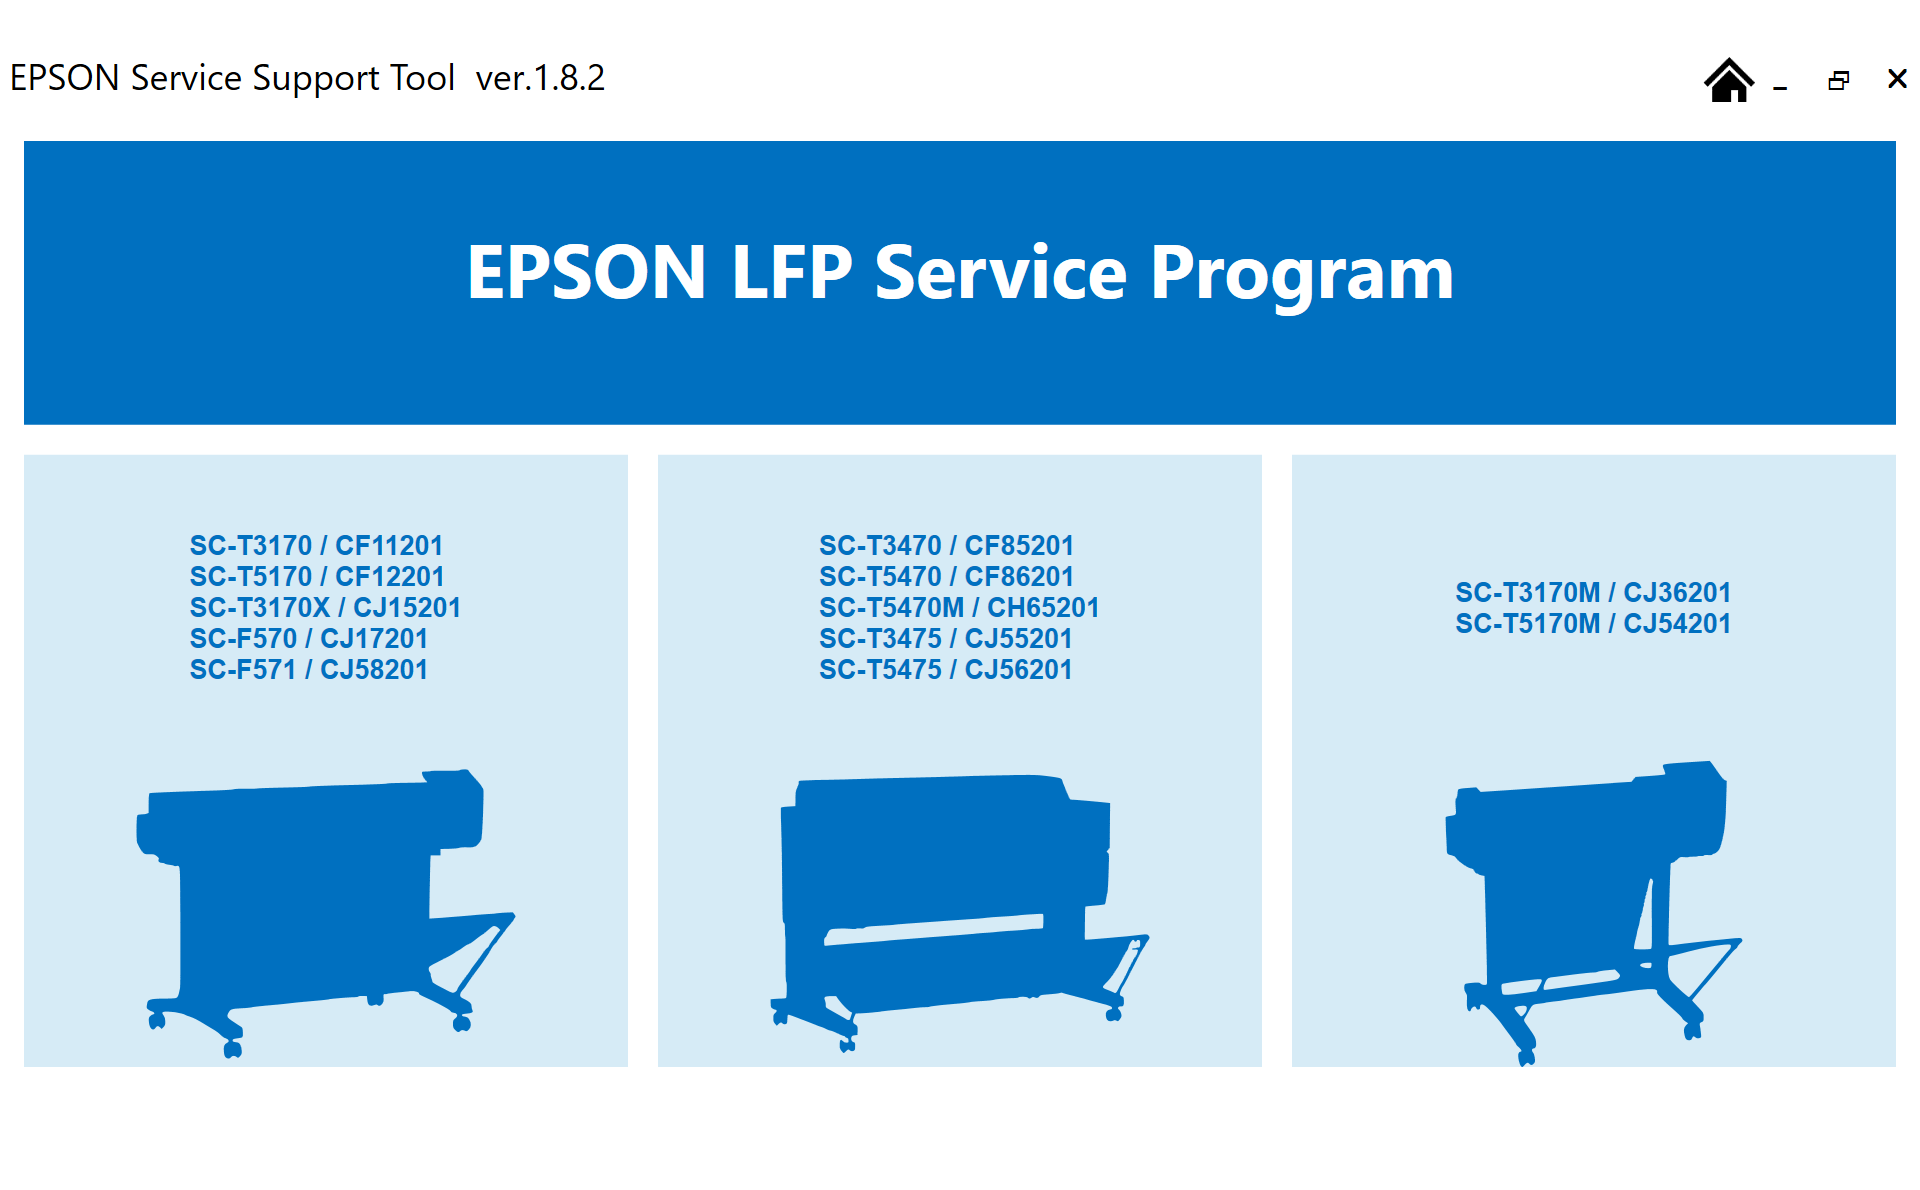 License for 1 PC for Epson <b> SC-F570, SC-F571, SC-T3170, SC-T3170M, SC-T3170X, SC-T3470, SC-T3475, SC-T5170, SC-T5170M, SC-T5470, SC-T5470M, SC-T5475 Series</b> EPTool version 1.8.2 - Service Support Tool